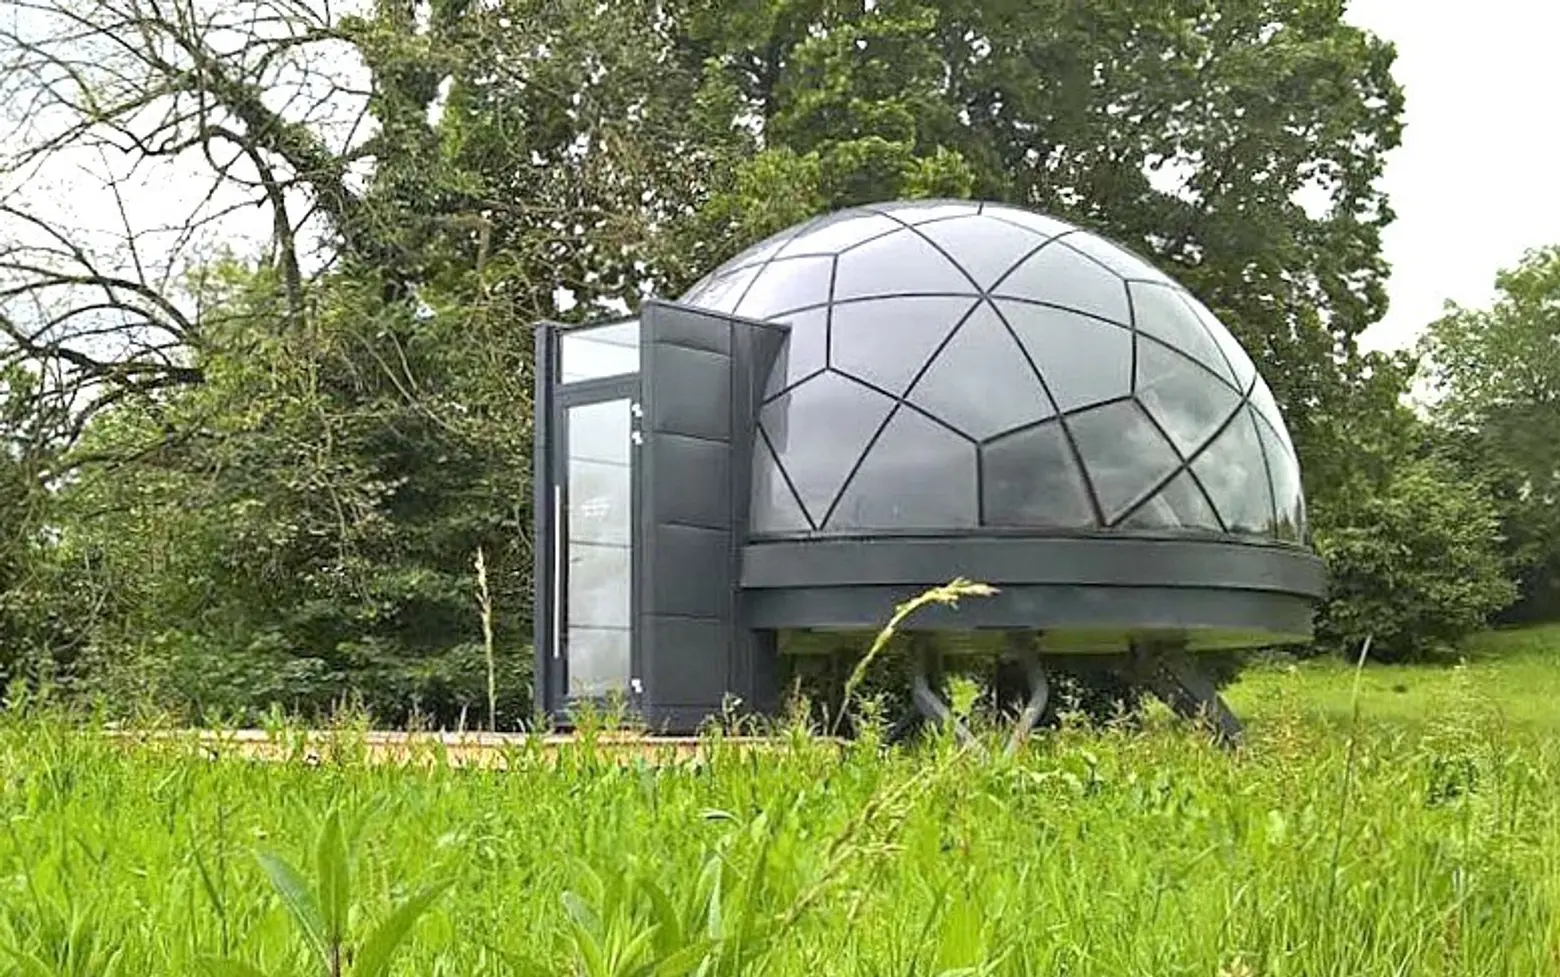 Set up a vacation home anywhere with these pop-up smartdomes